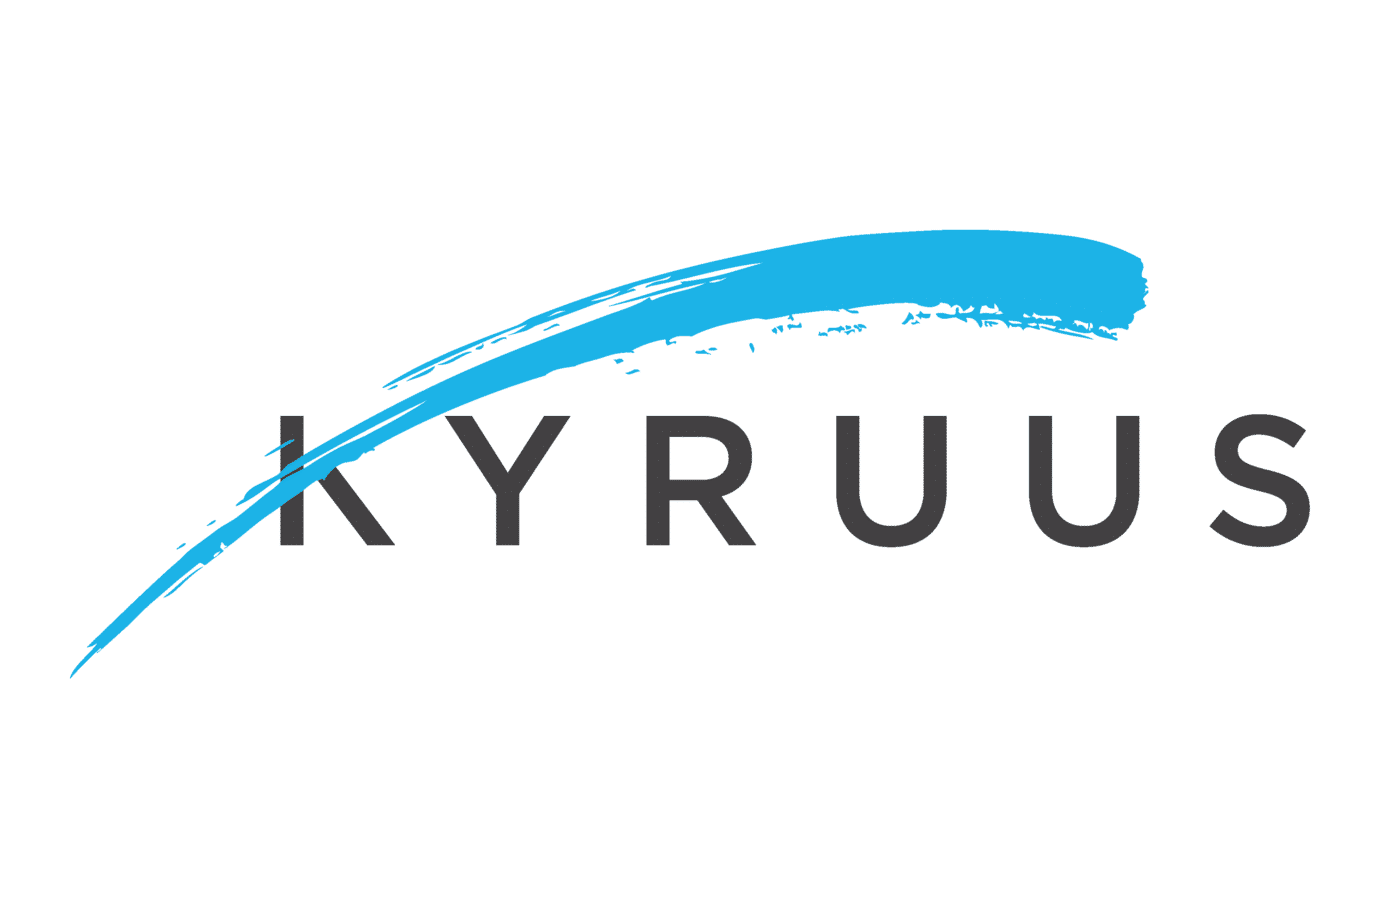 TriHealth Enhances Its Consumer Access Experience with Patient-Provider Matching Solution from Kyruus